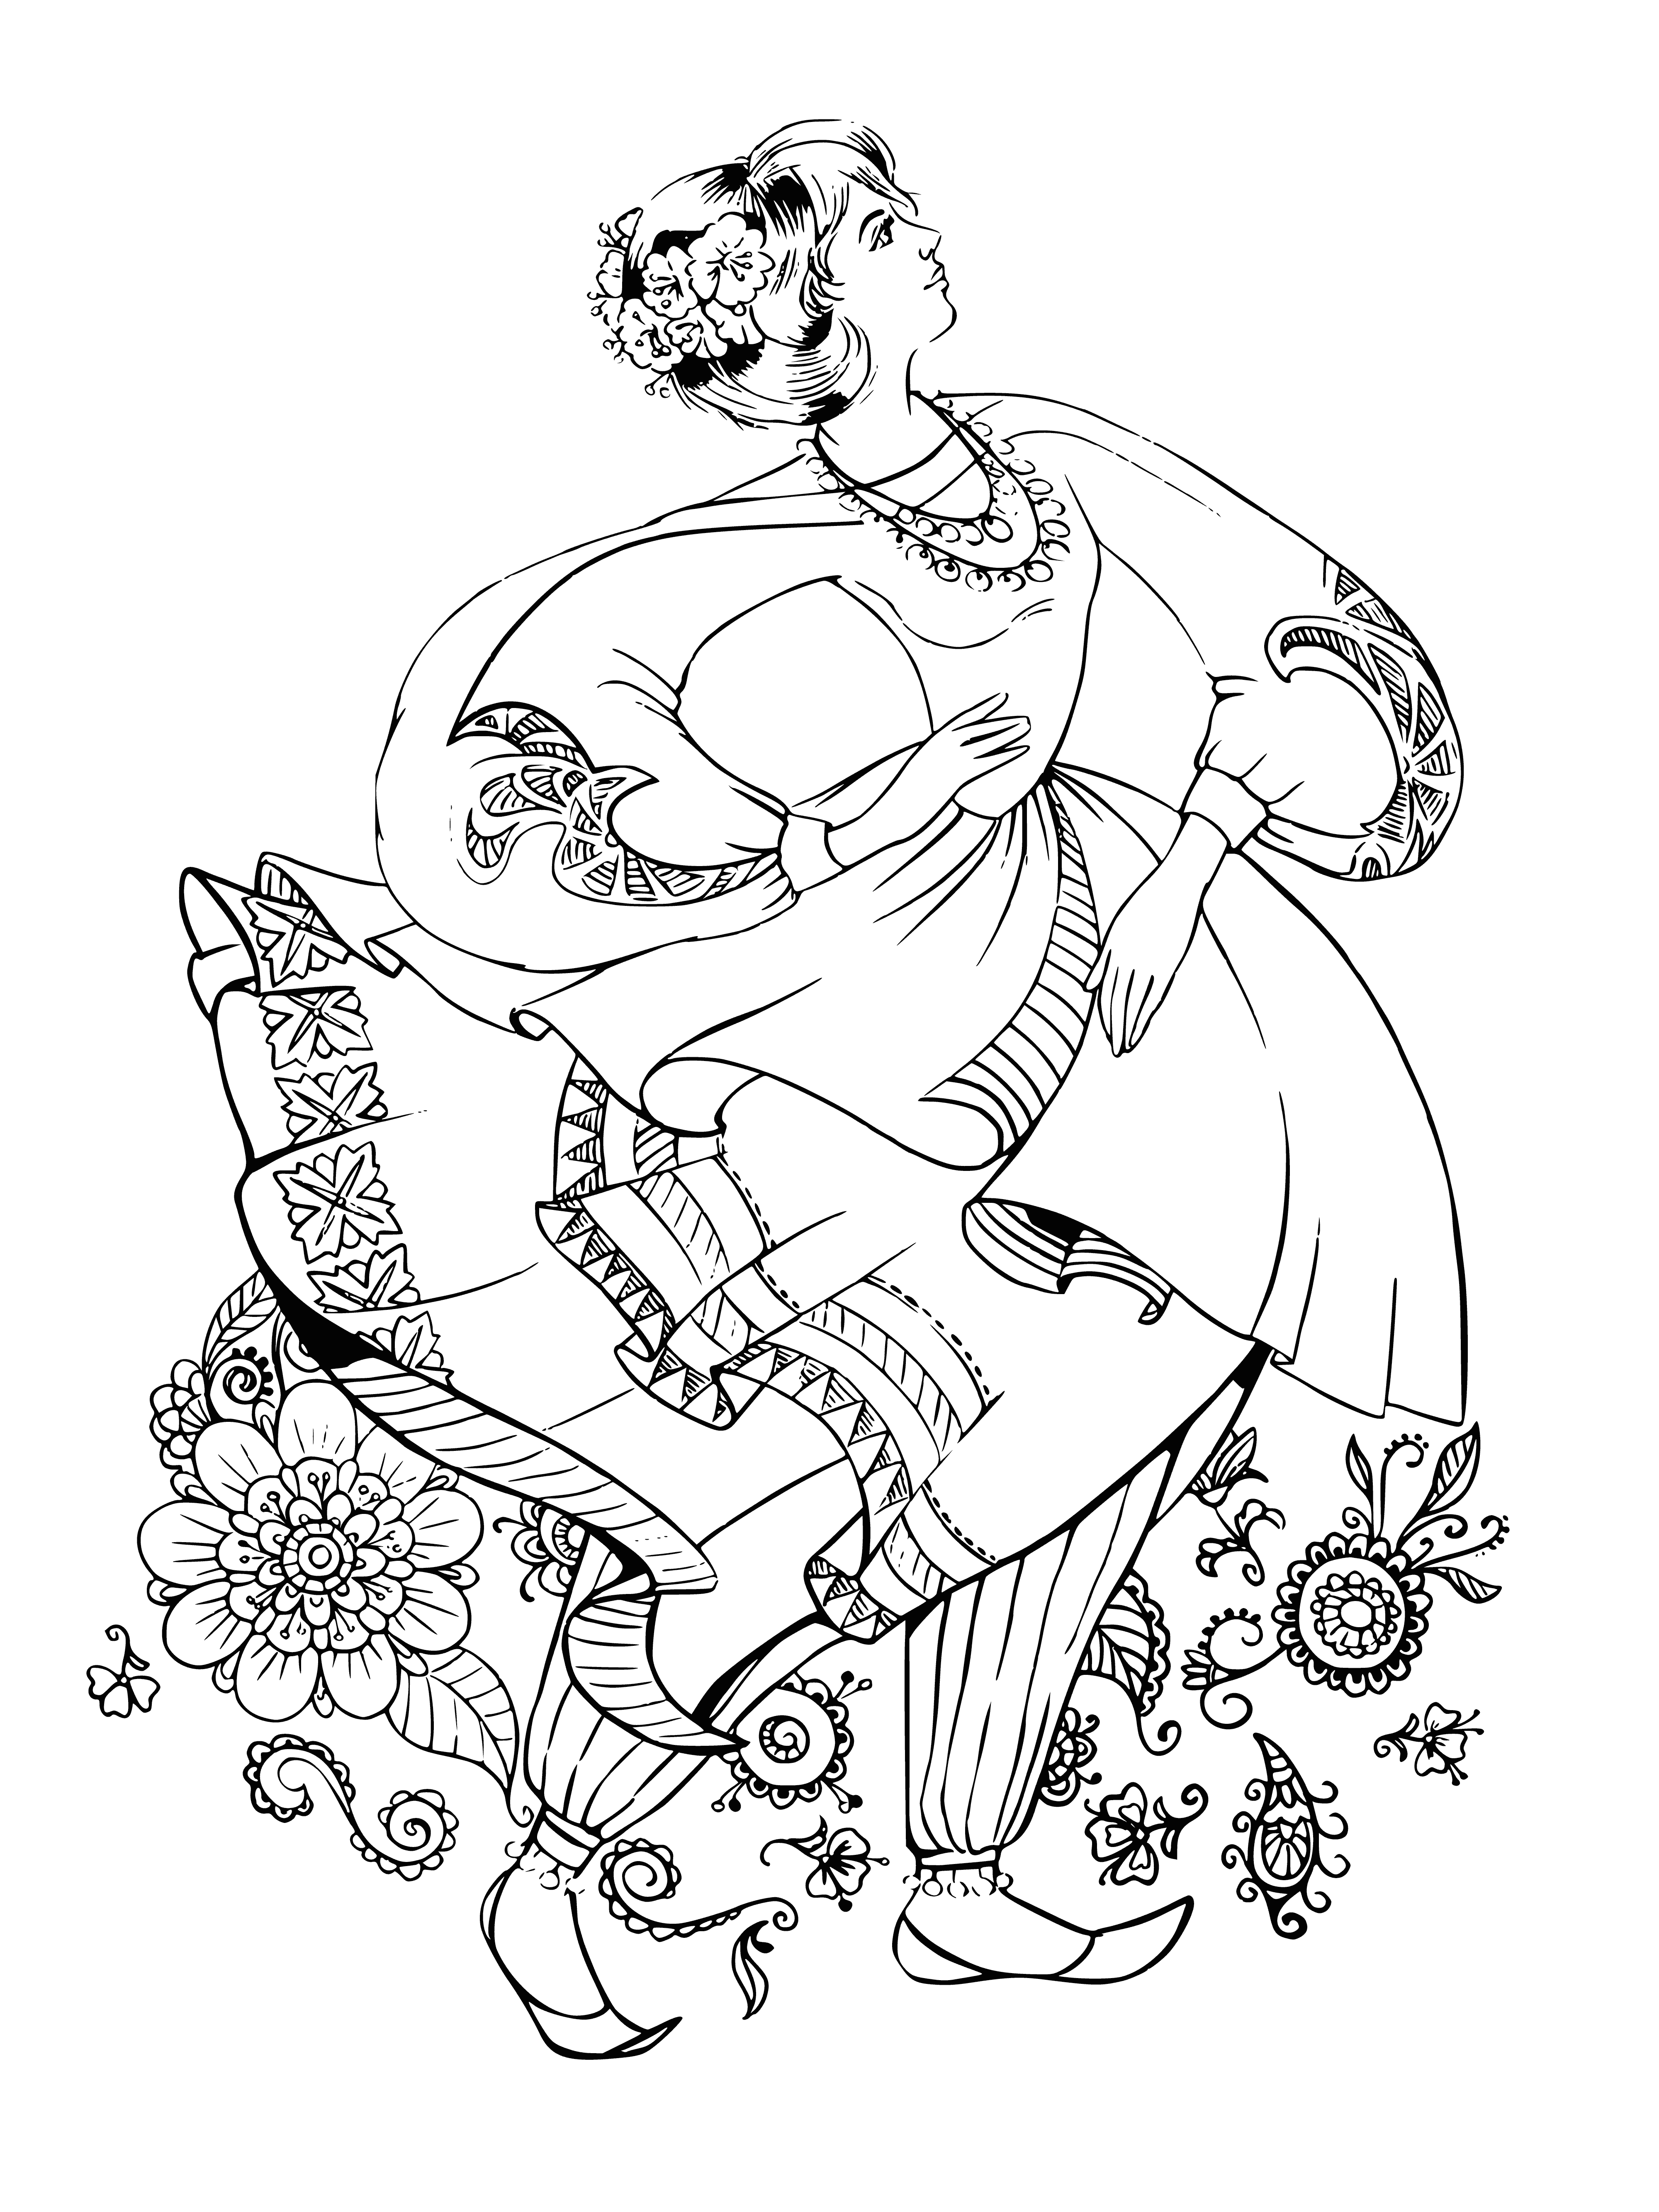 coloring page: Girl in trousers stands, arms crossed, looking off to the side.